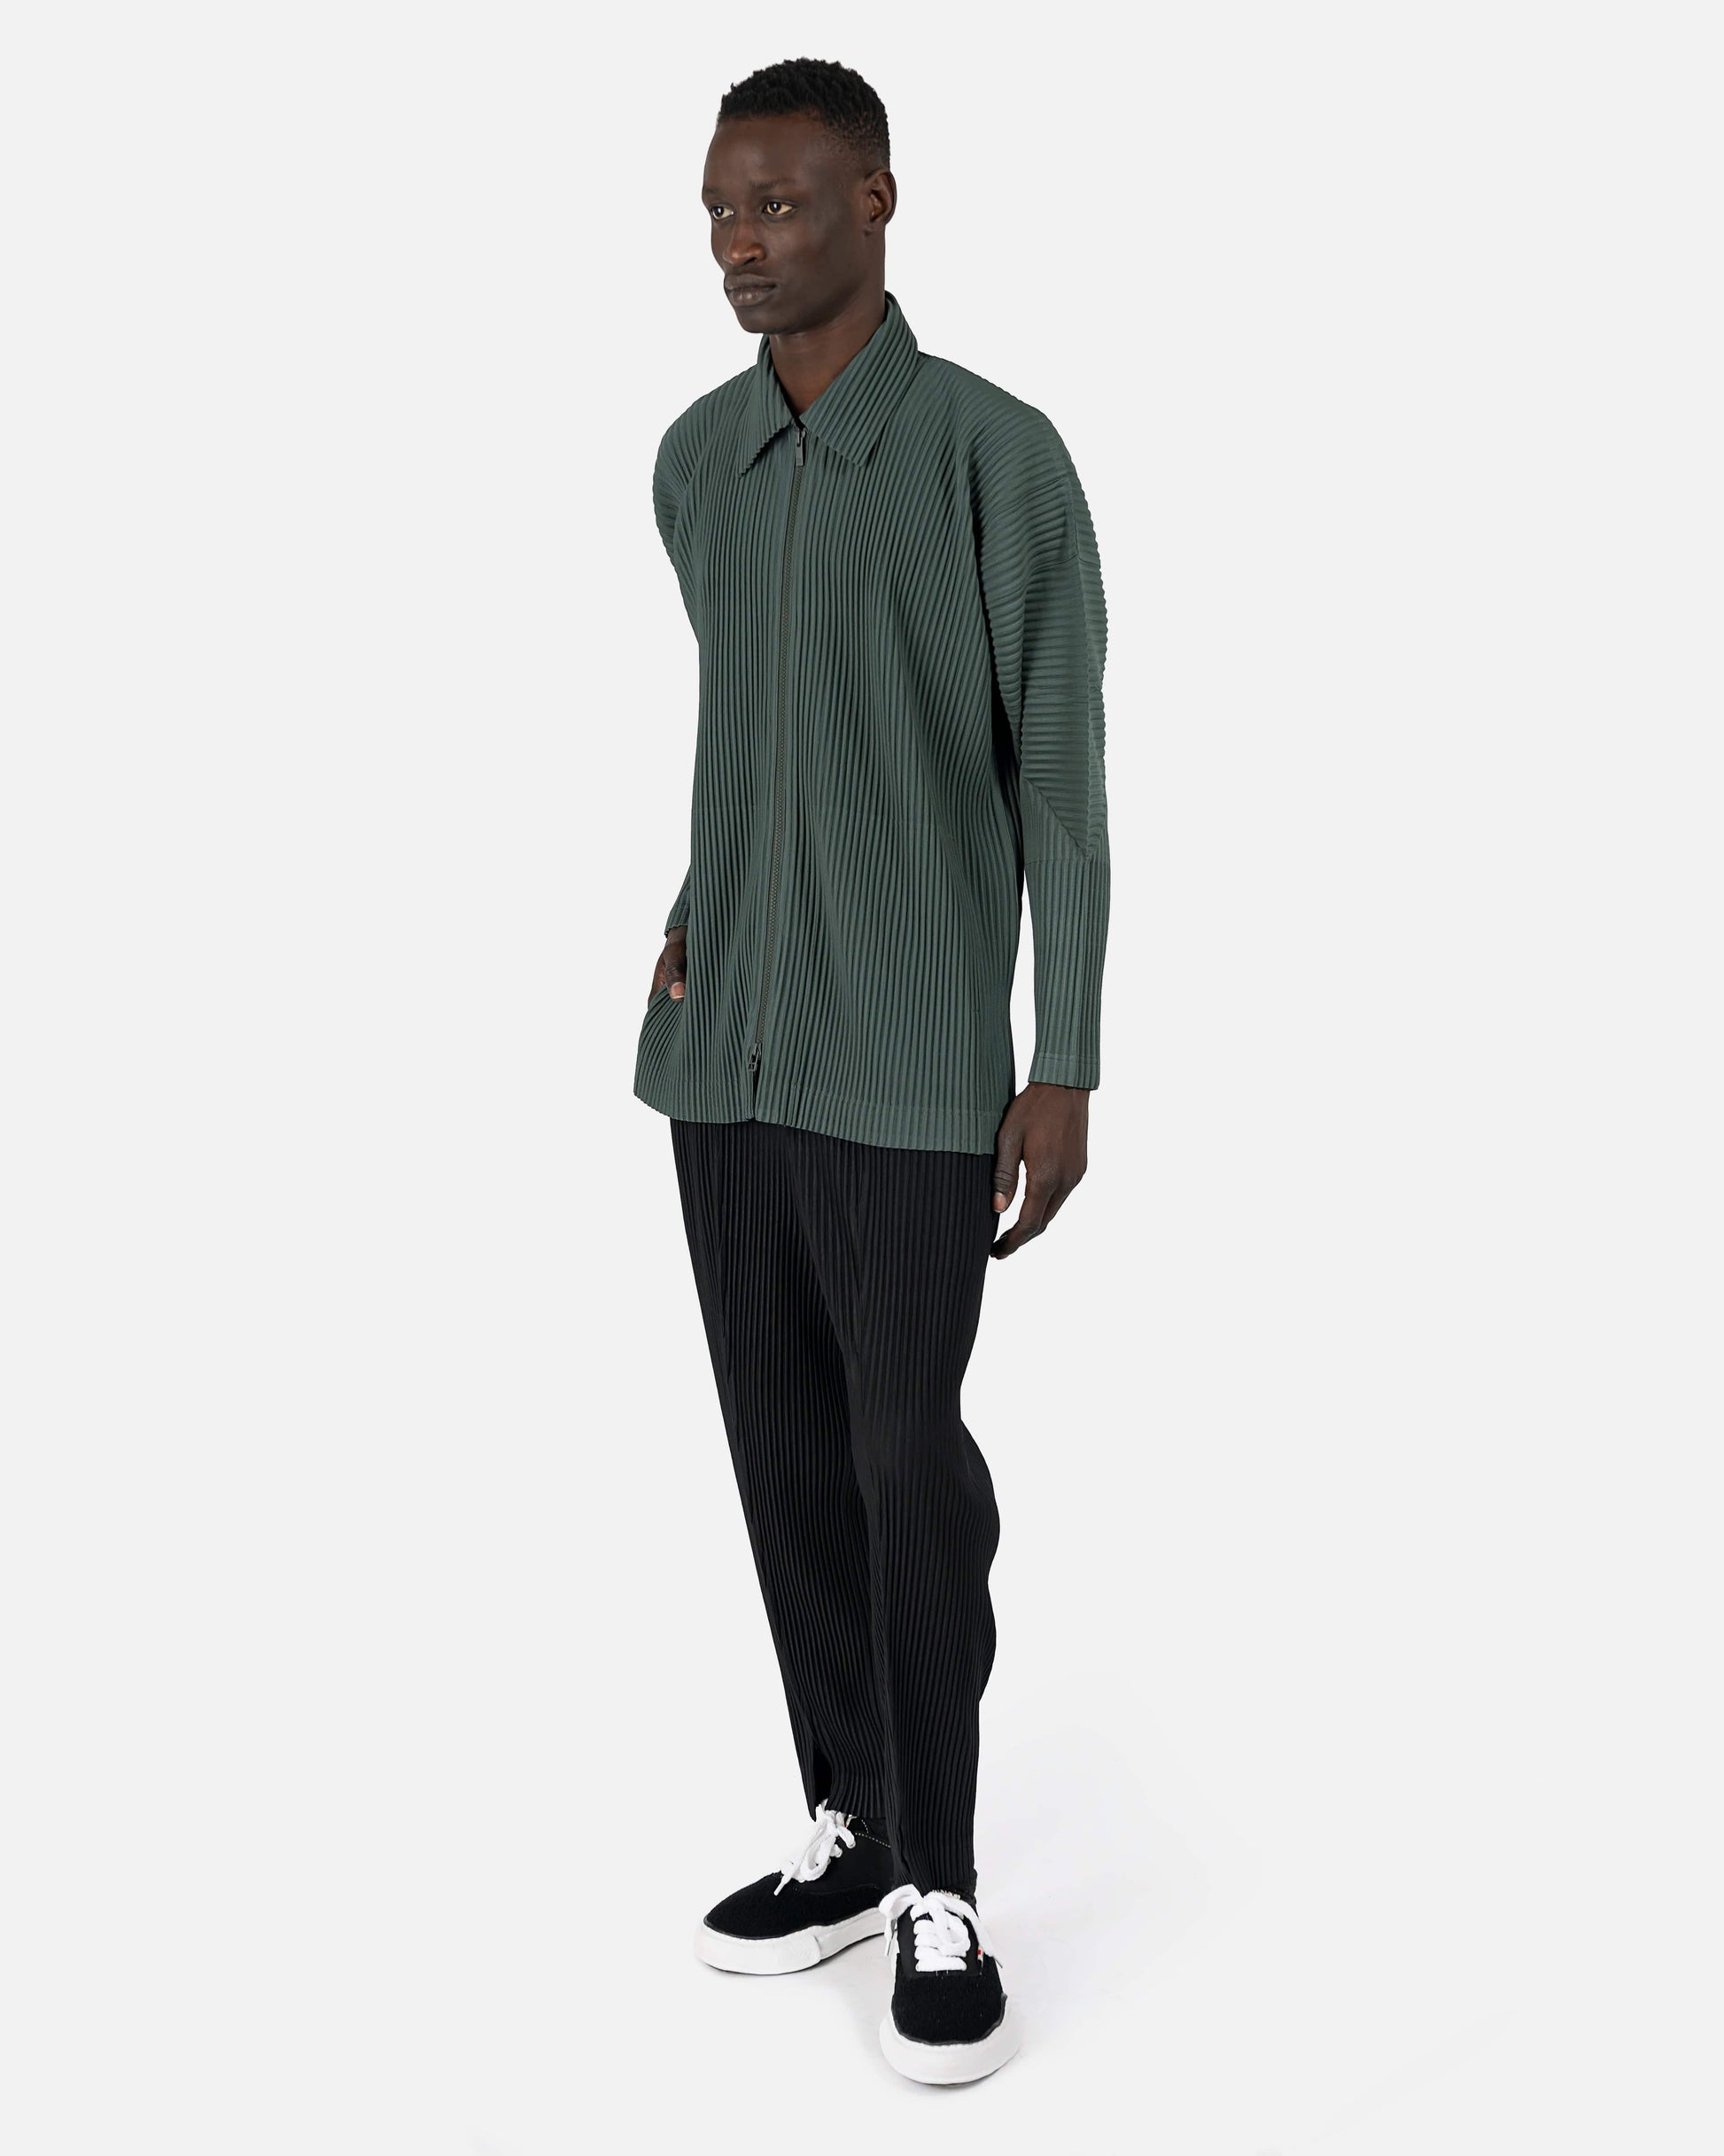 Homme Plissé Issey Miyake mens sweater Monthly Colors January Cardigan in Slate Green